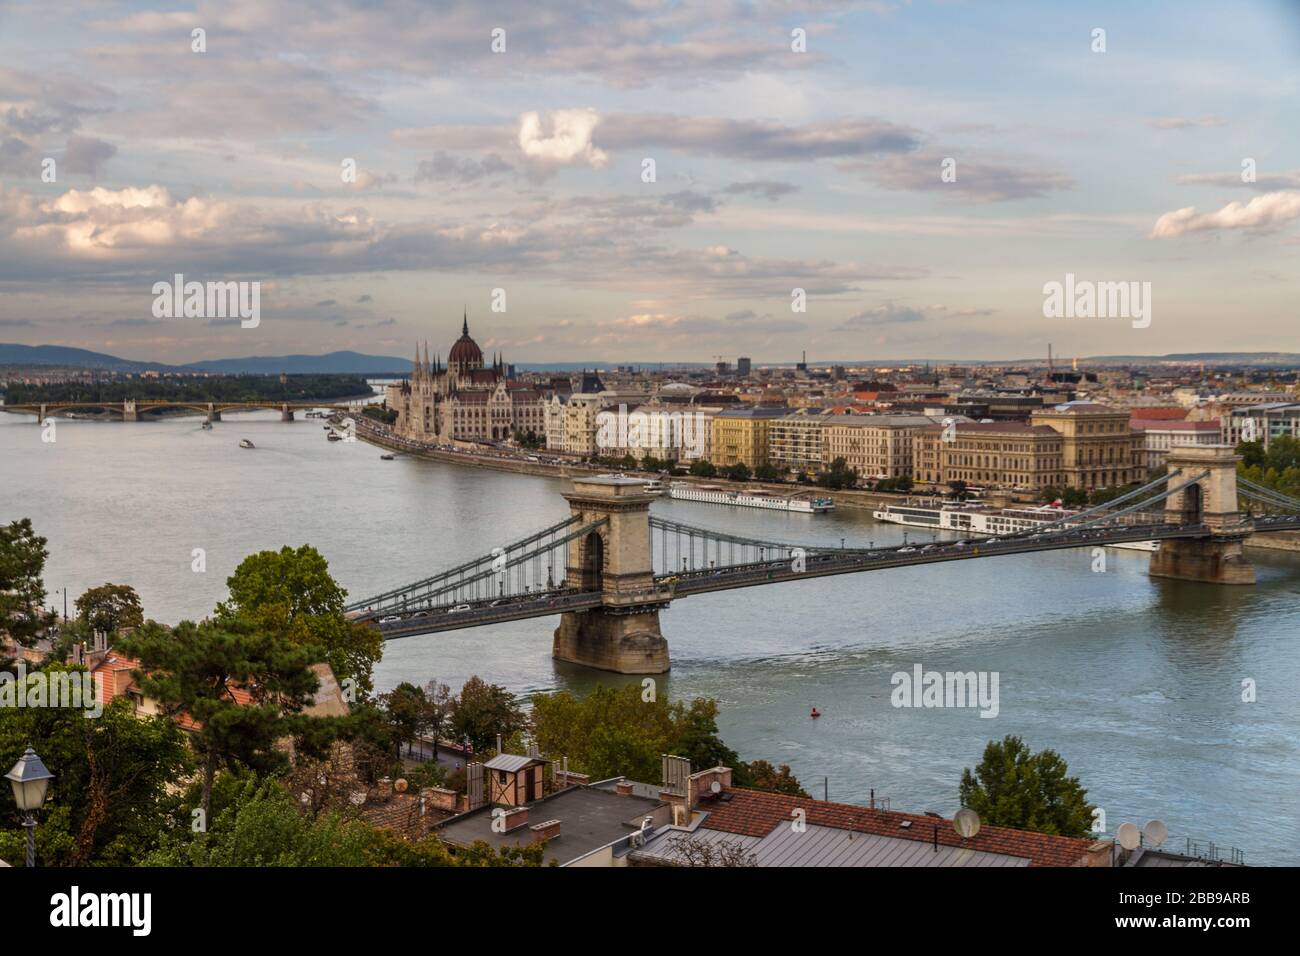 Evening view of river danube, chain bridge and Hungarian Parliament Building, Budapest, Hungary, landscape, clouds in sky. Stock Photo